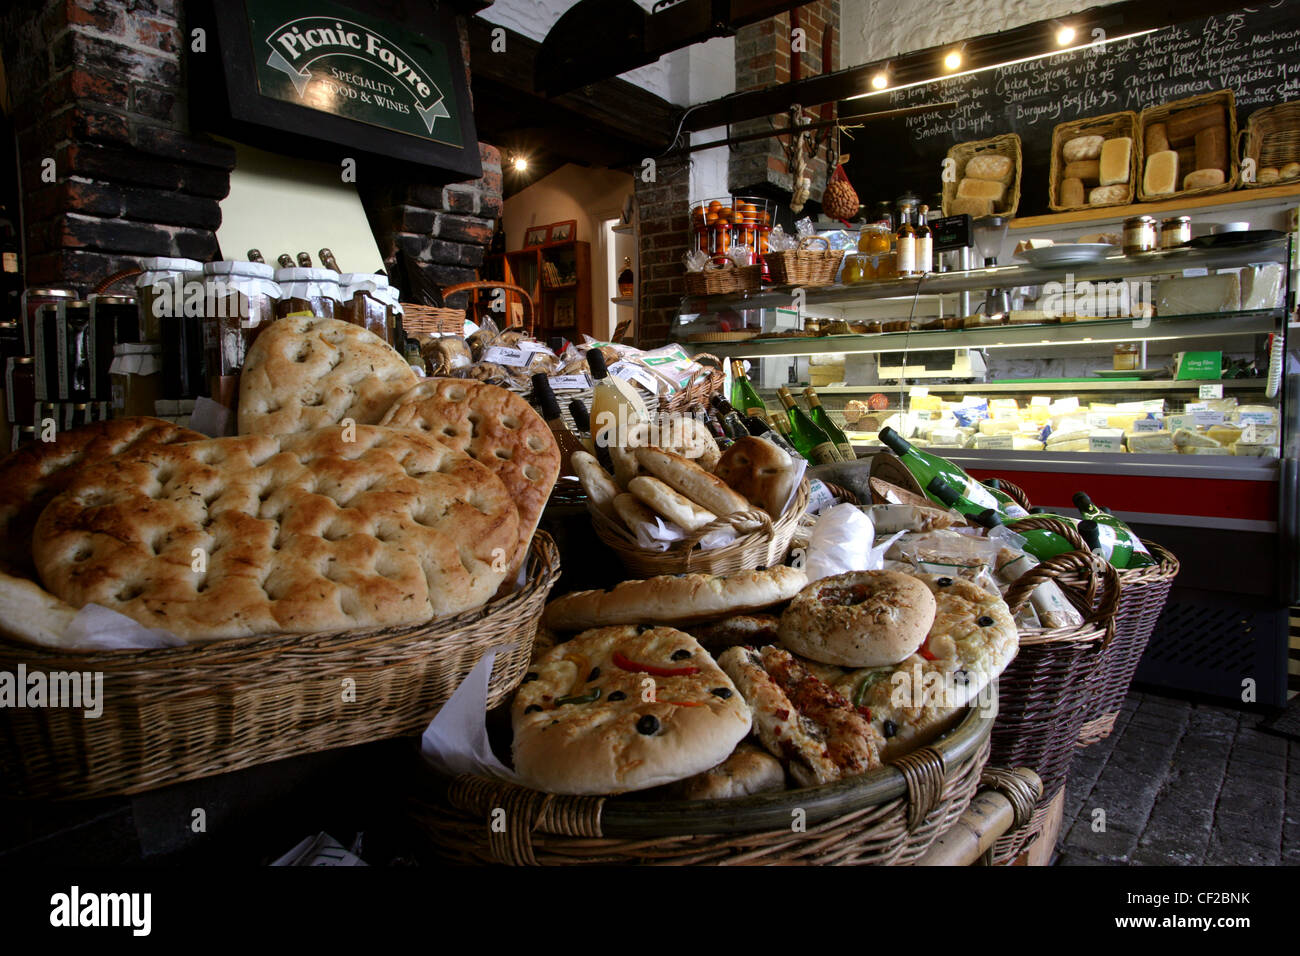 Detail image of Picnic Fayre Delicatessen shop set in the Old Forge, Cley next the Sea, Norfolk, UK Stock Photo